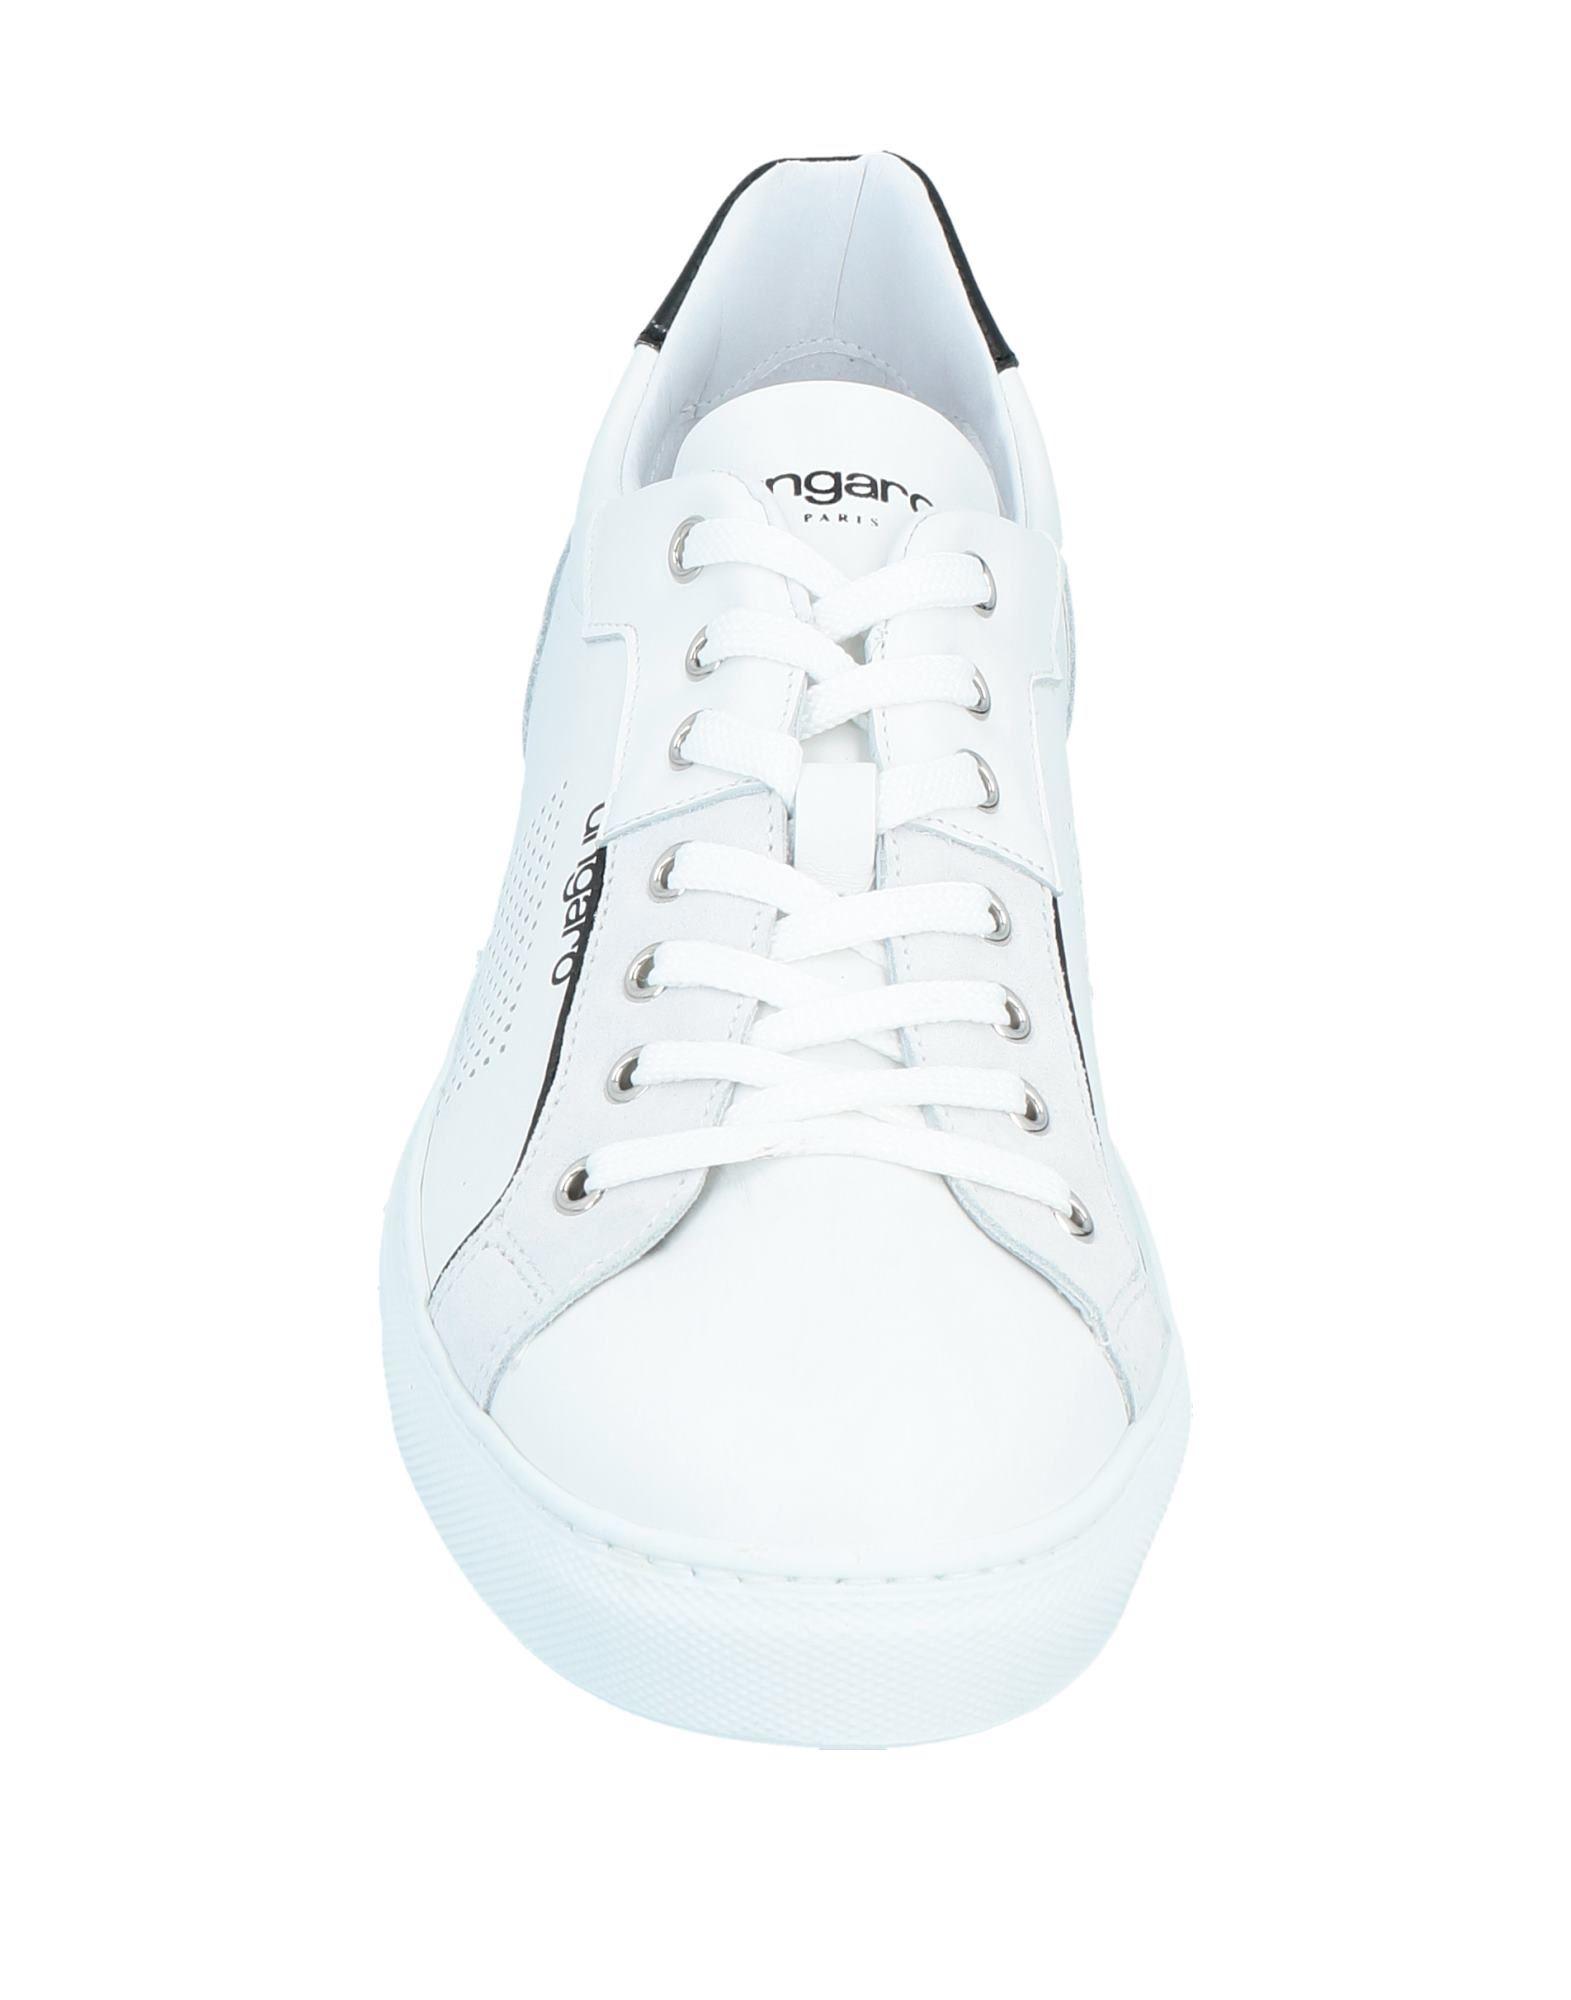 Emanuel Ungaro Leather Trainers in White for Men | Lyst